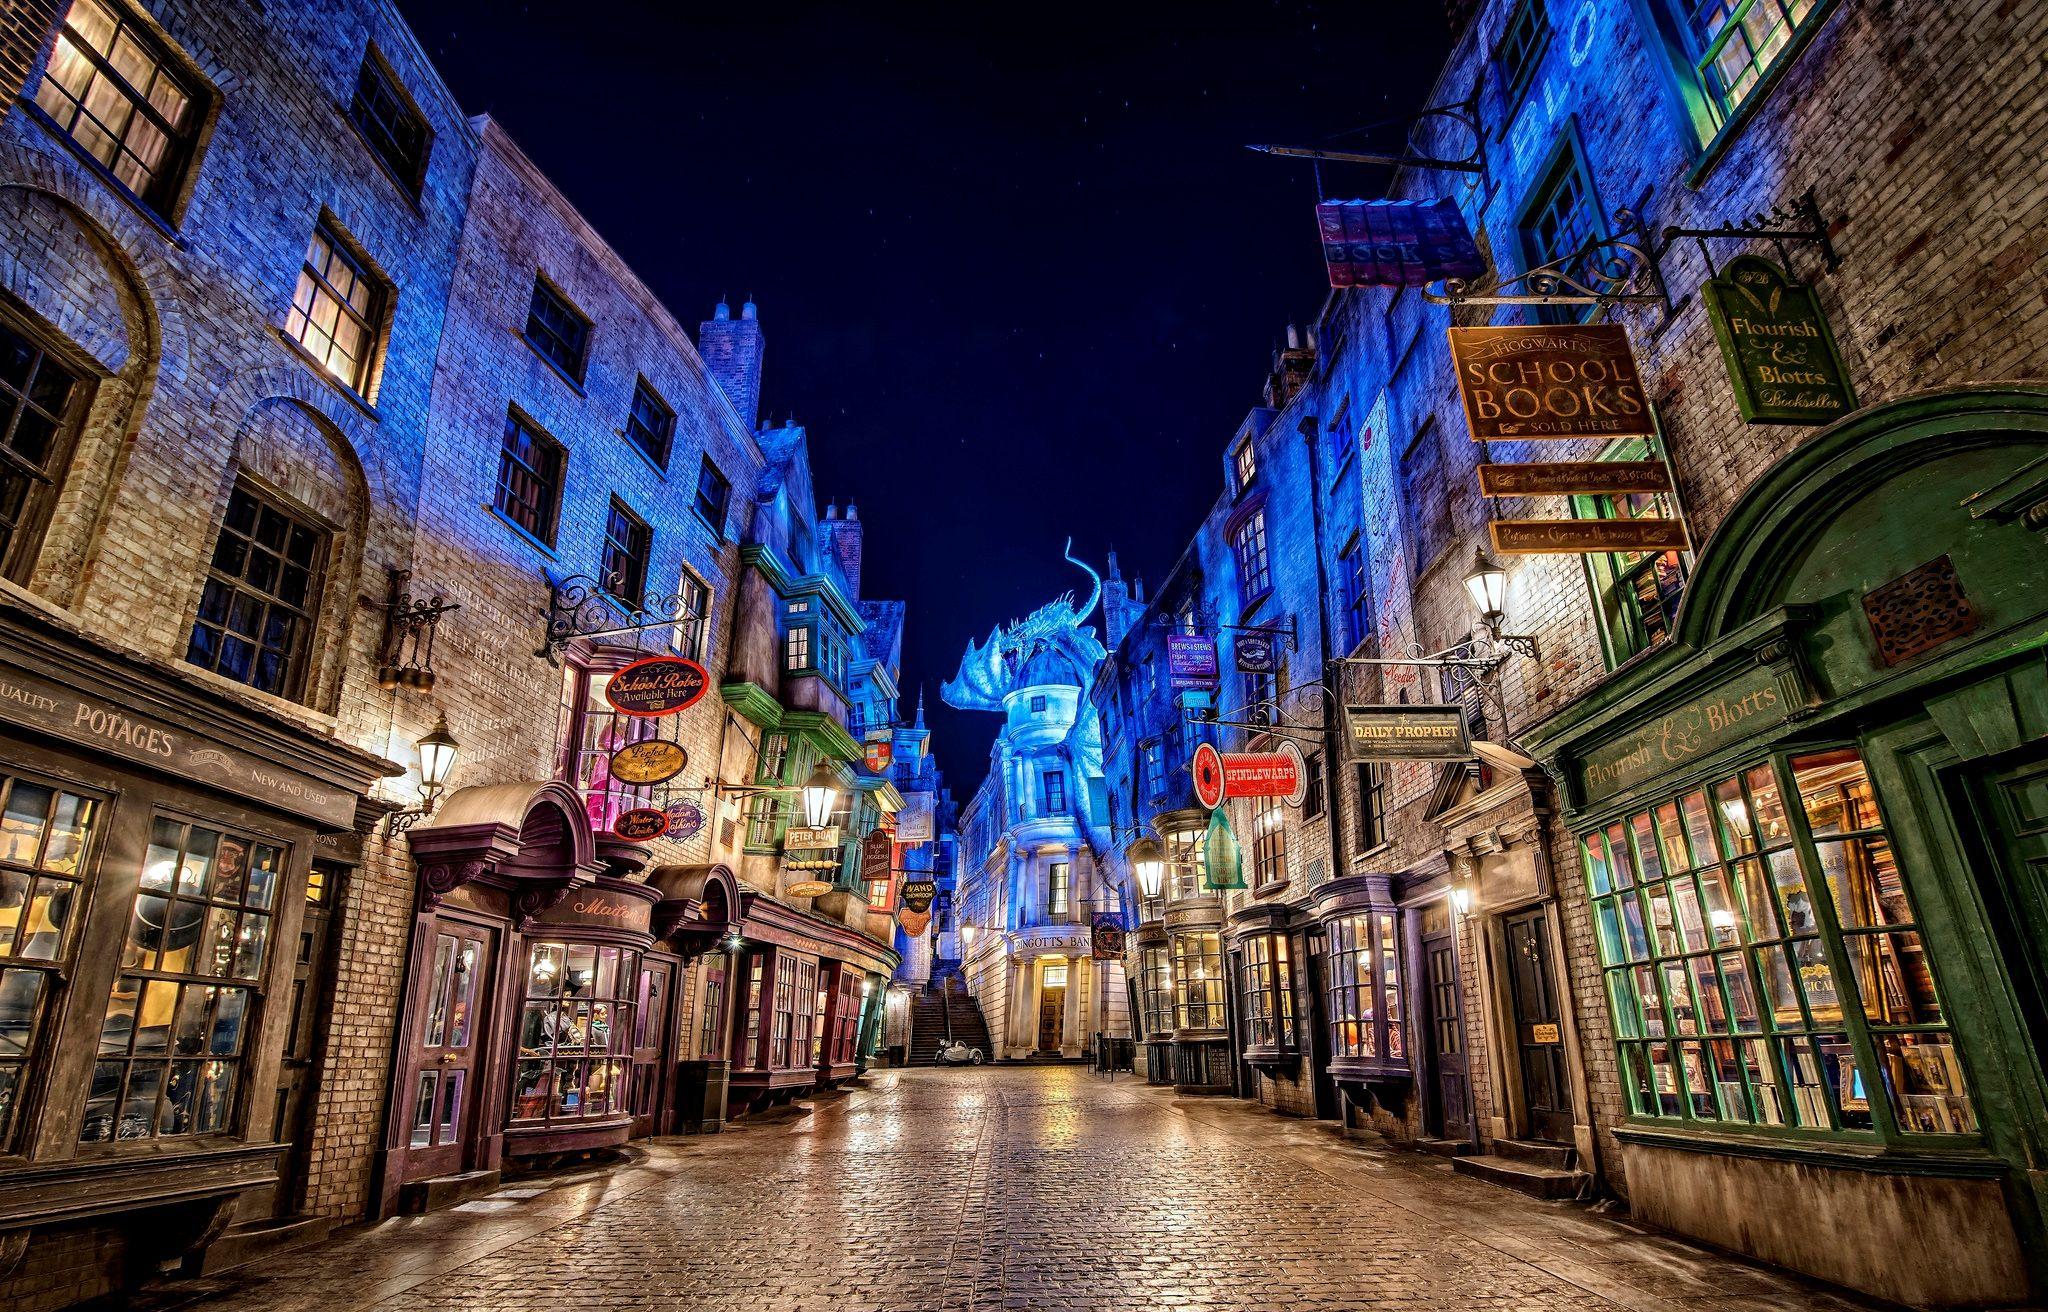 Diagon Alley from Harry Potter at Universal Studios HD Wallpapers.